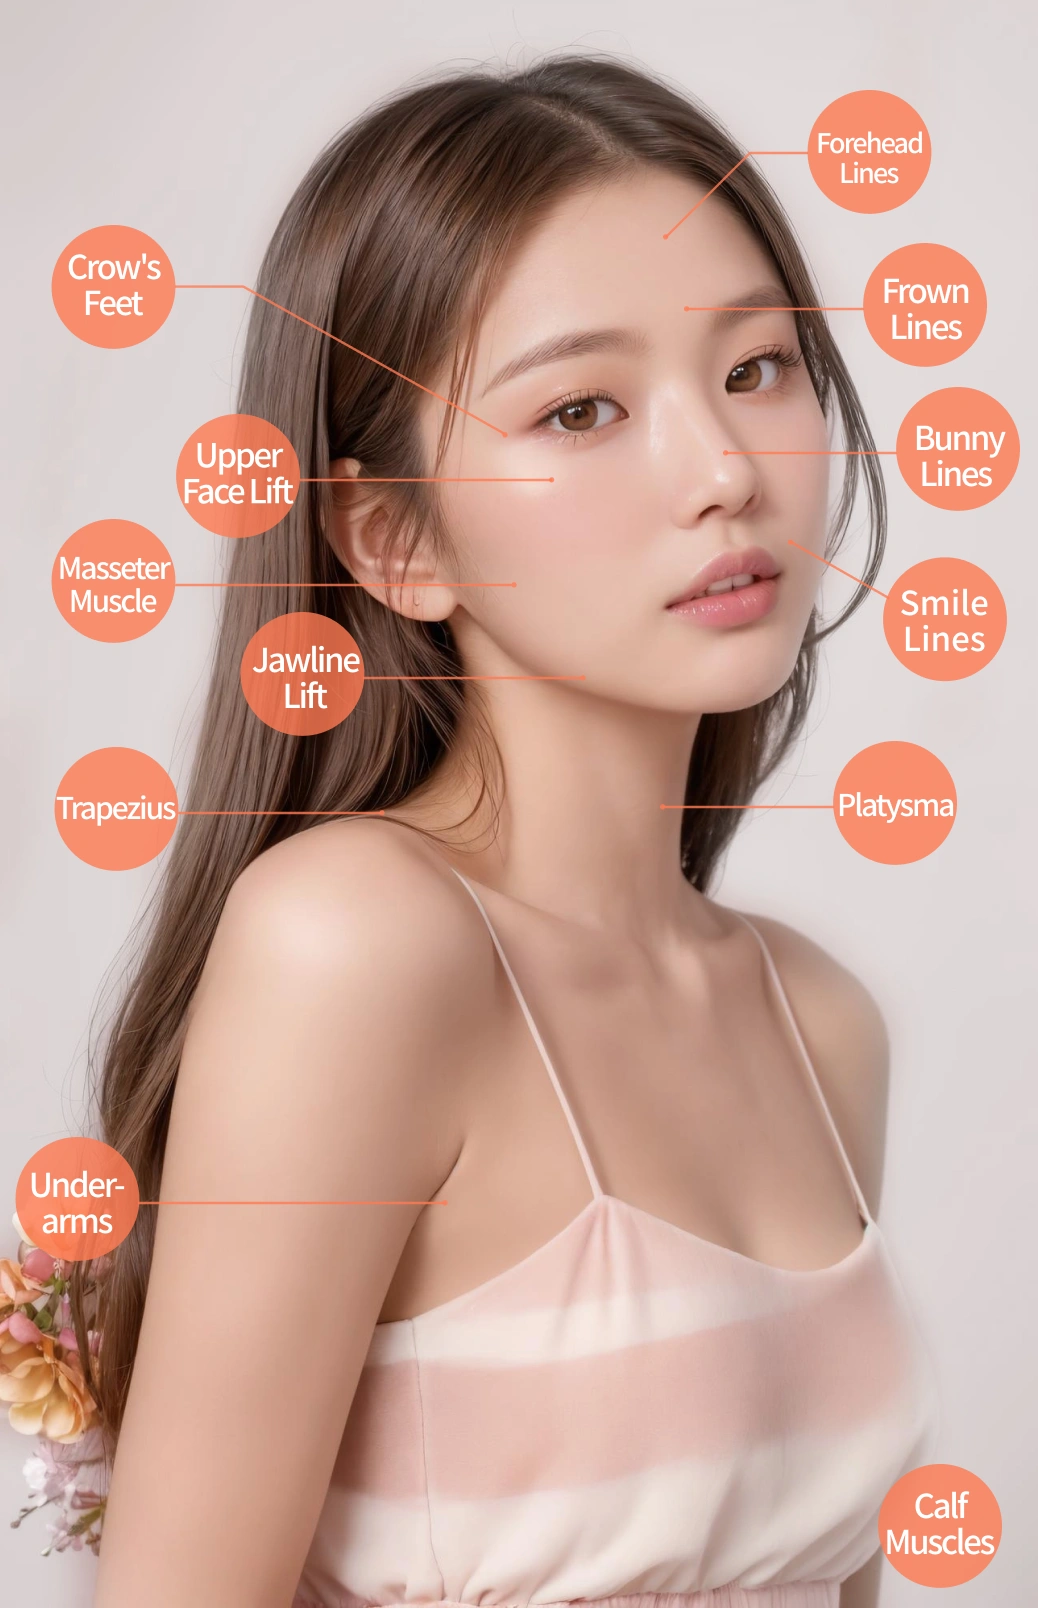 Treatment Areas: Forehead lines, frown lines, bunny lines, smile lines, crow's feet, upper face lift, masseter muscle, jawline lift, trapezius, platysma, underarms, calf muscles